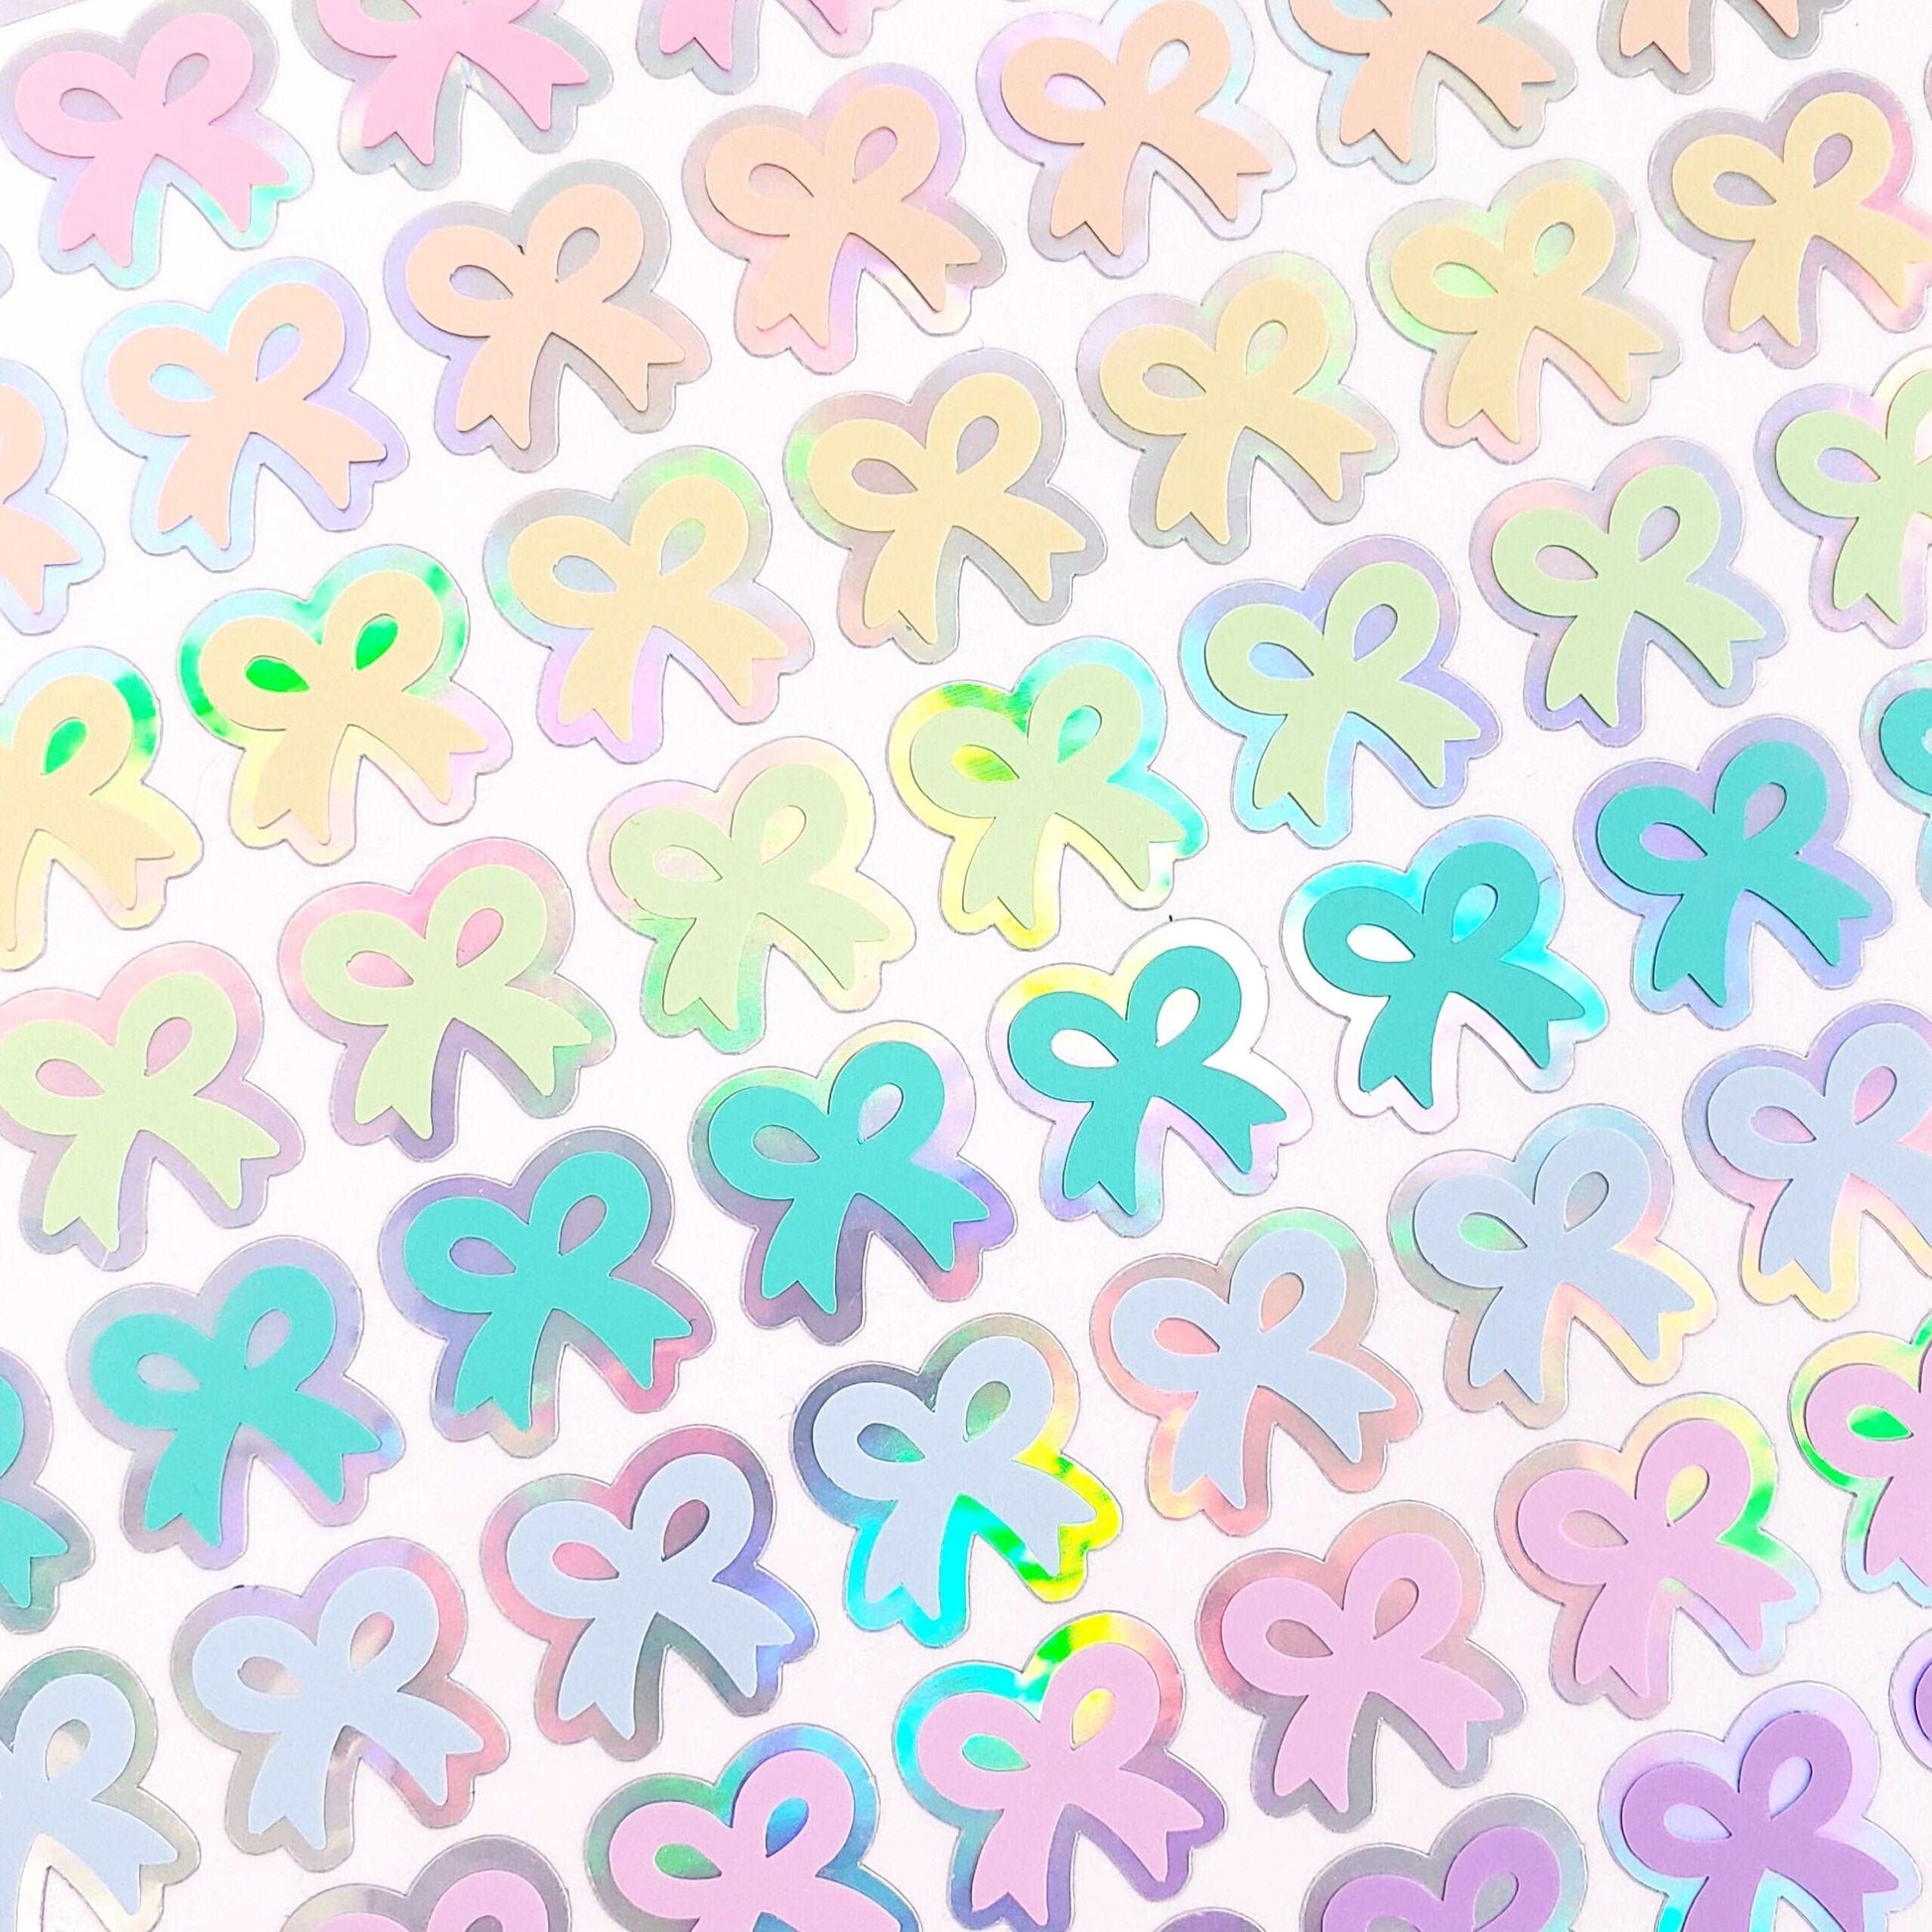 Bow Stickers, set of 88 small ribbon stickers in pastel rainbow colors, peel and stick decals for planners, journals, gift tags and cards.